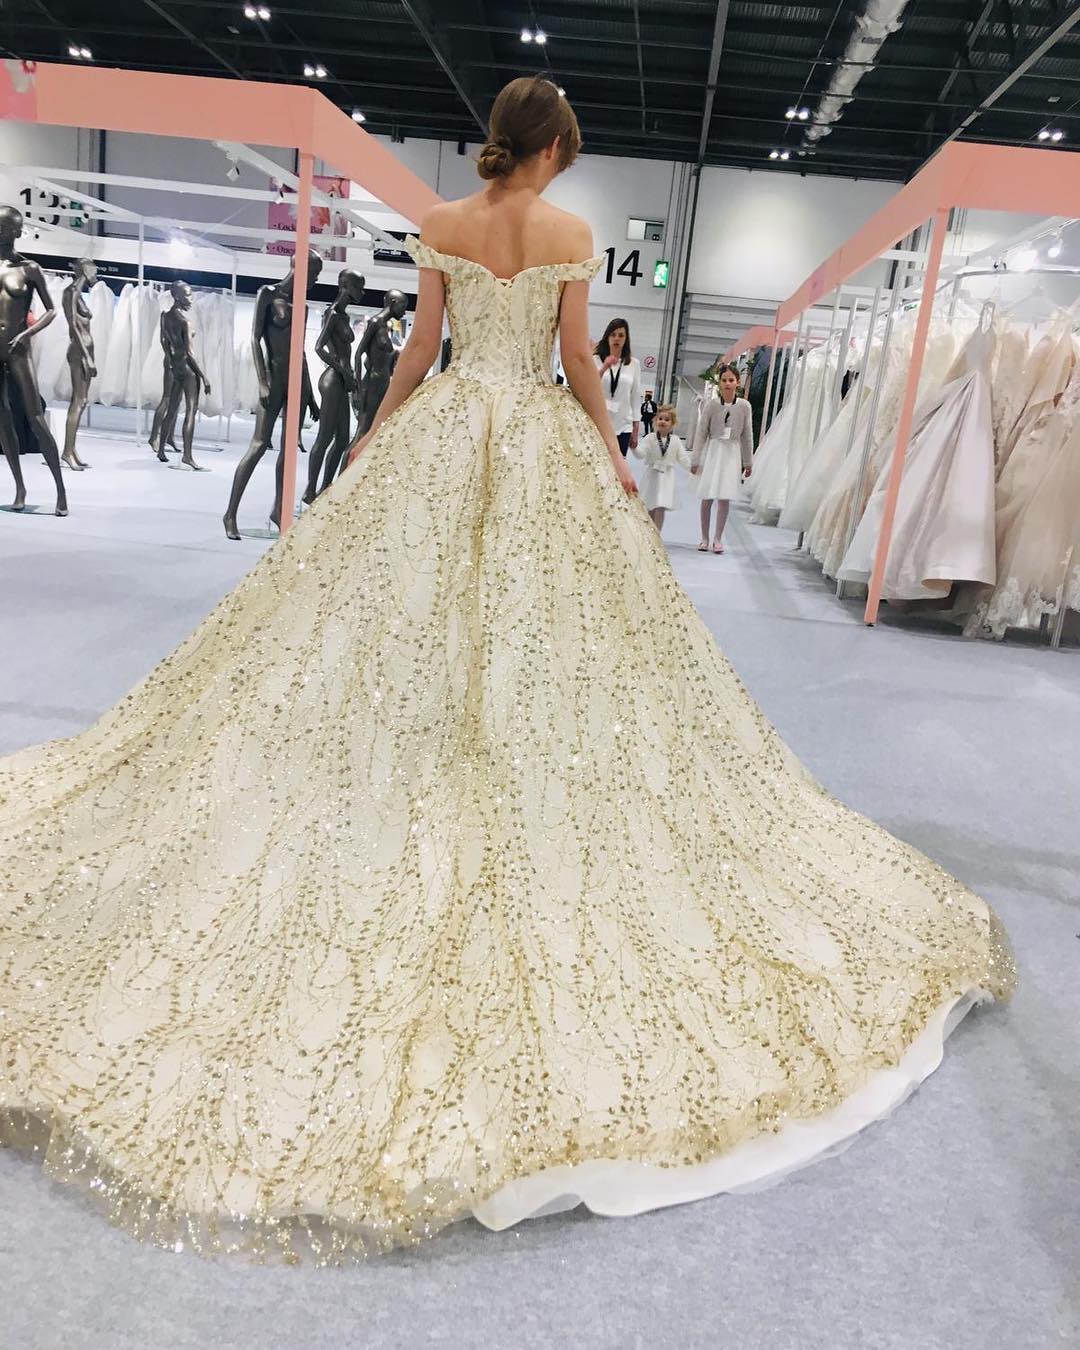 Show-stopper off-shoulder gold wedding ball gown with dazzling gold embroidery. // mysweetengagement.com